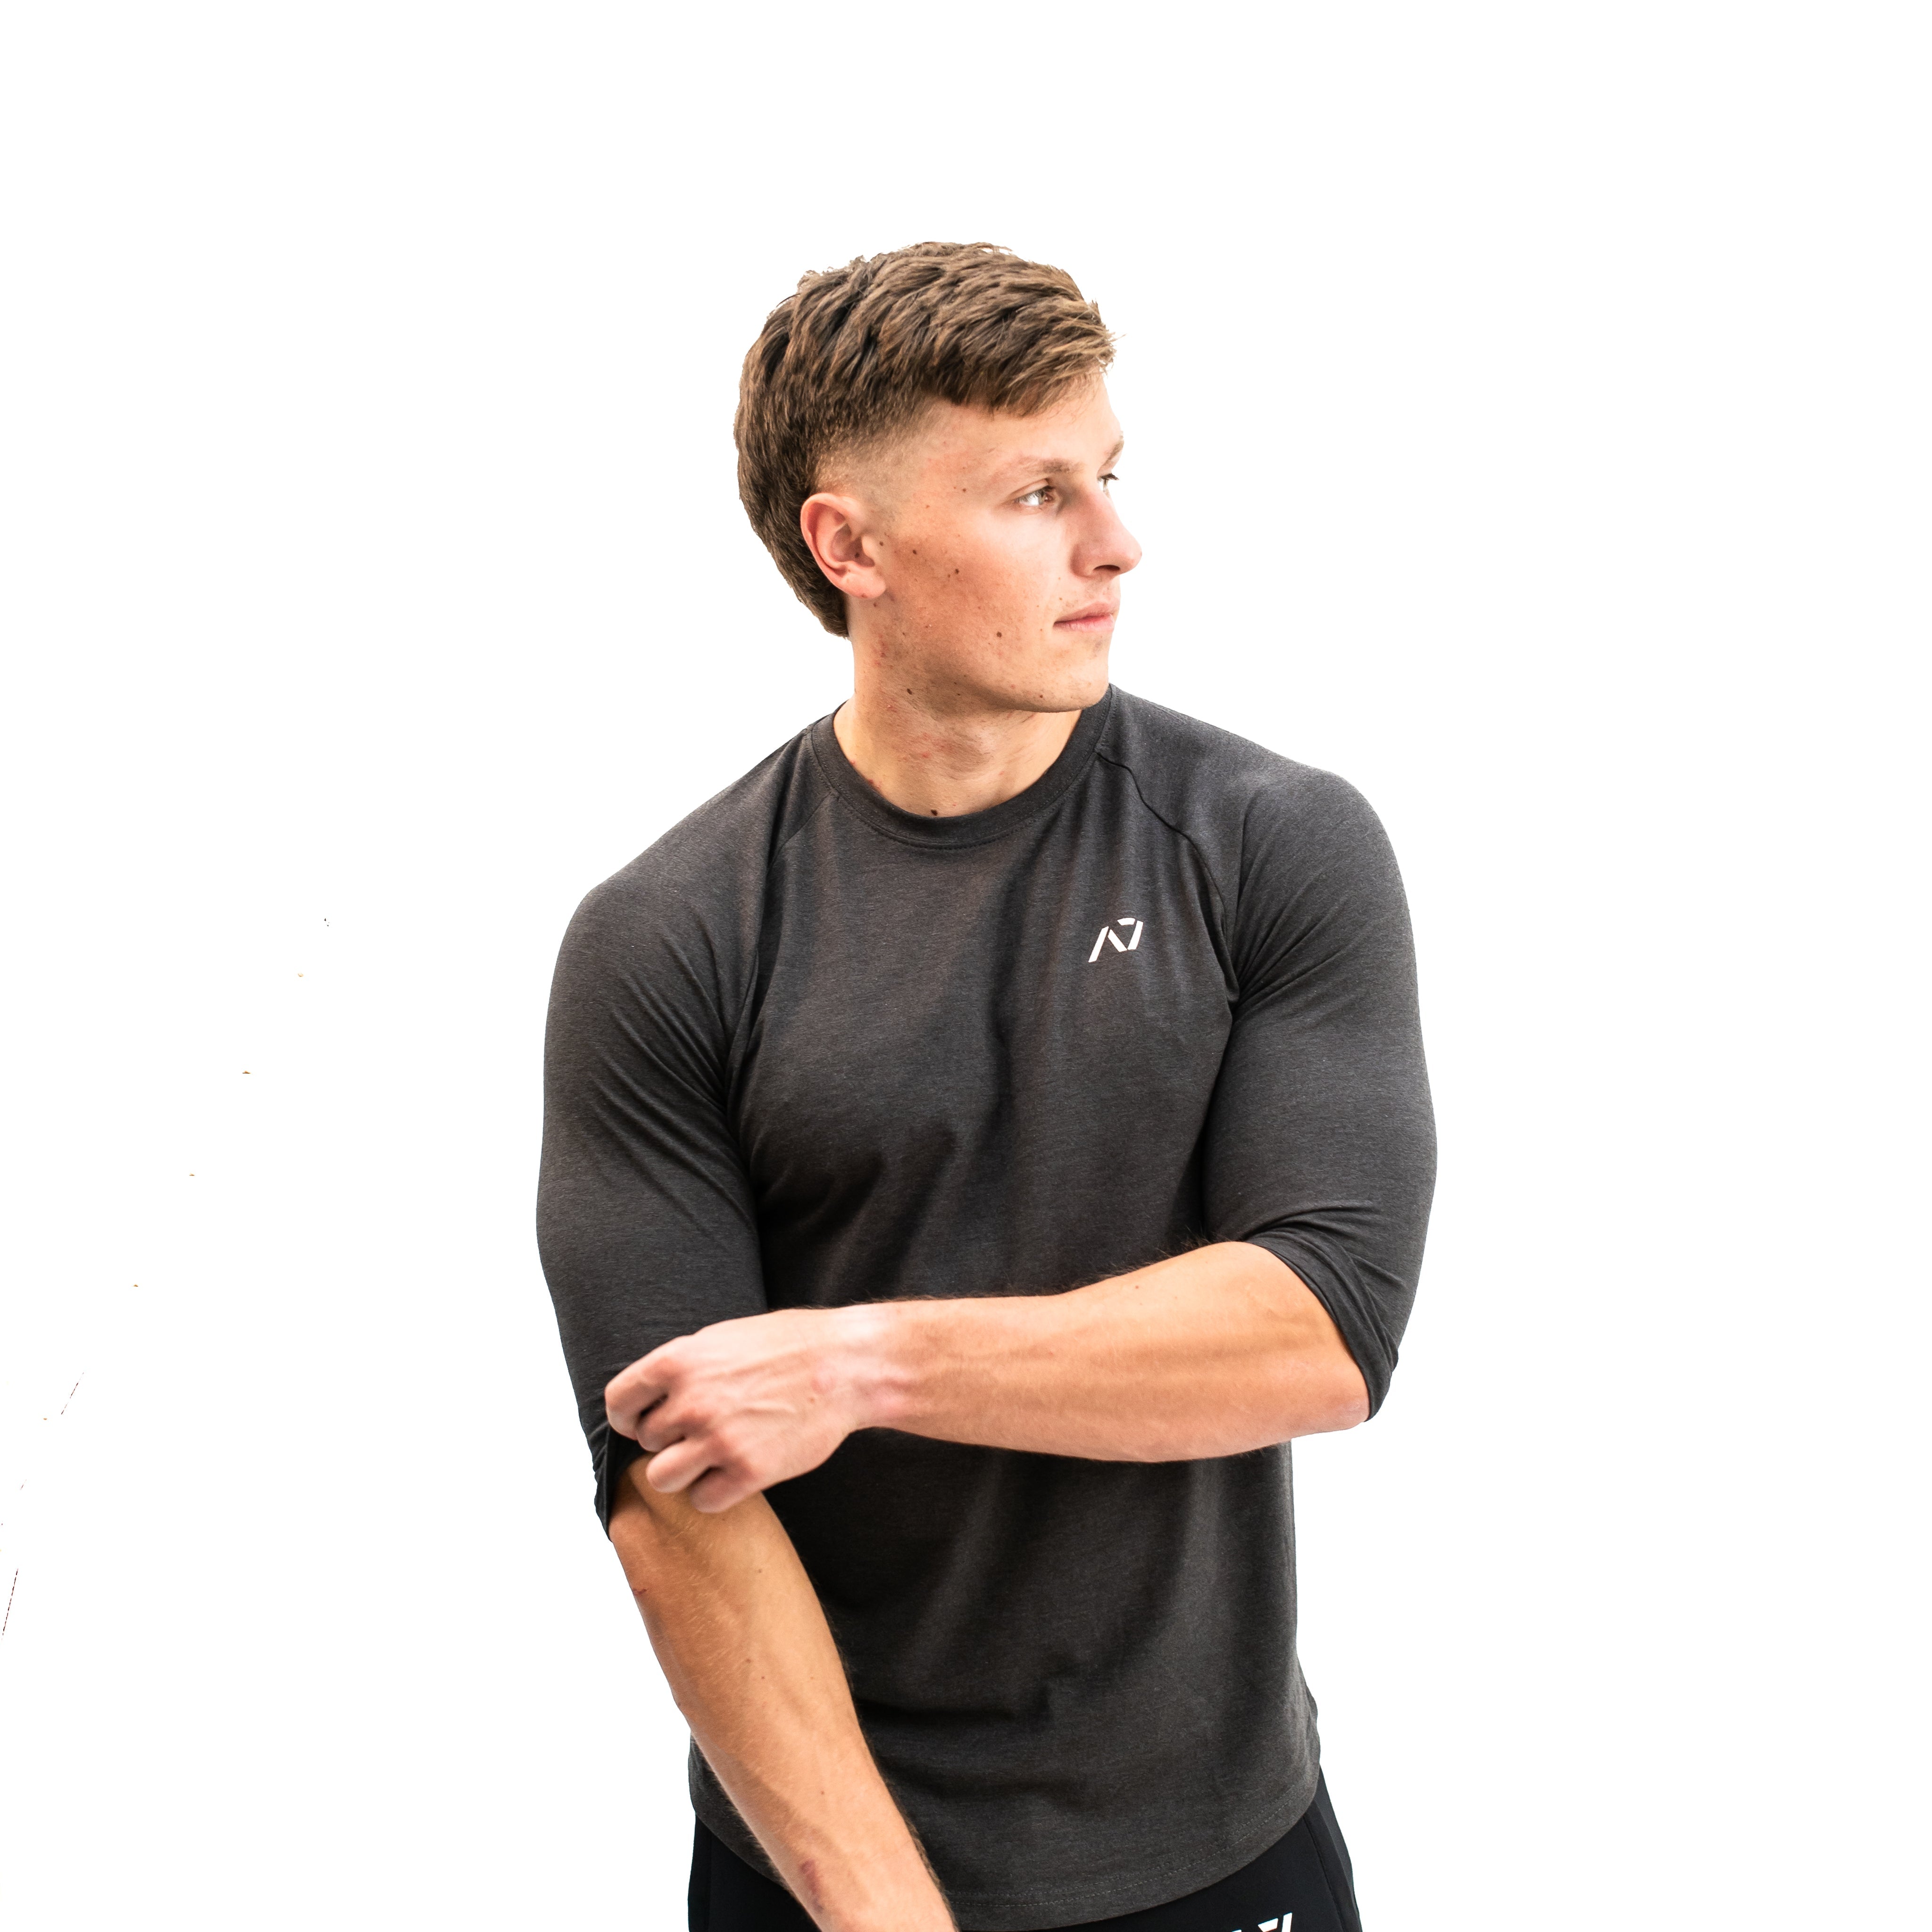 The A7 balance collection which combines comfort and aesthetics. The pieces in this collection are made with comfortable fabrics and minimal logos to create a simple, yet impactful look. The Balance shirts are made with a high quality polyester cotton spandex material. Balance shirts are great for in and out the gym Purchase A7 Balance Shirt from A7 Europe. Purchase A7 Balance Shirt from A7 UK. Available in UK and Europe including France, Italy, Germany, the Netherlands, Sweden and Poland.